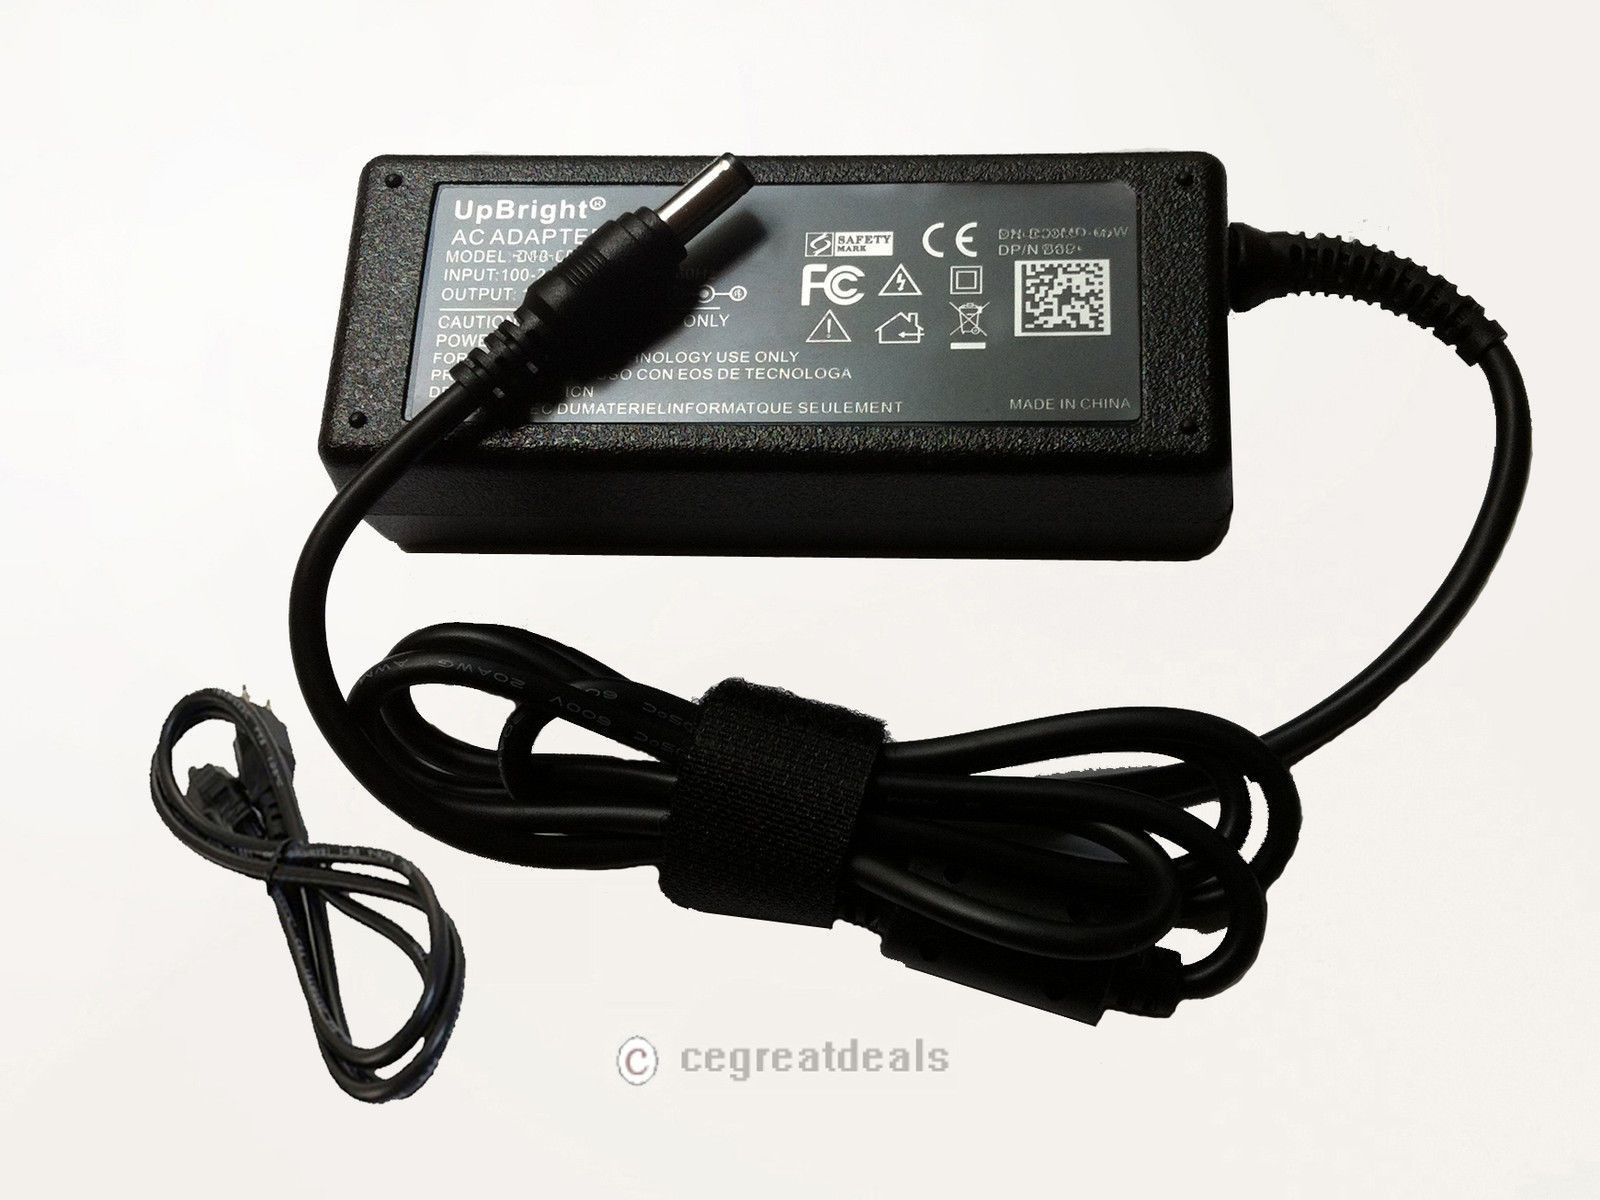 NEW AC Adapter For Precor EFX 576i Elliptical Trainer Charger Power Supply Cord